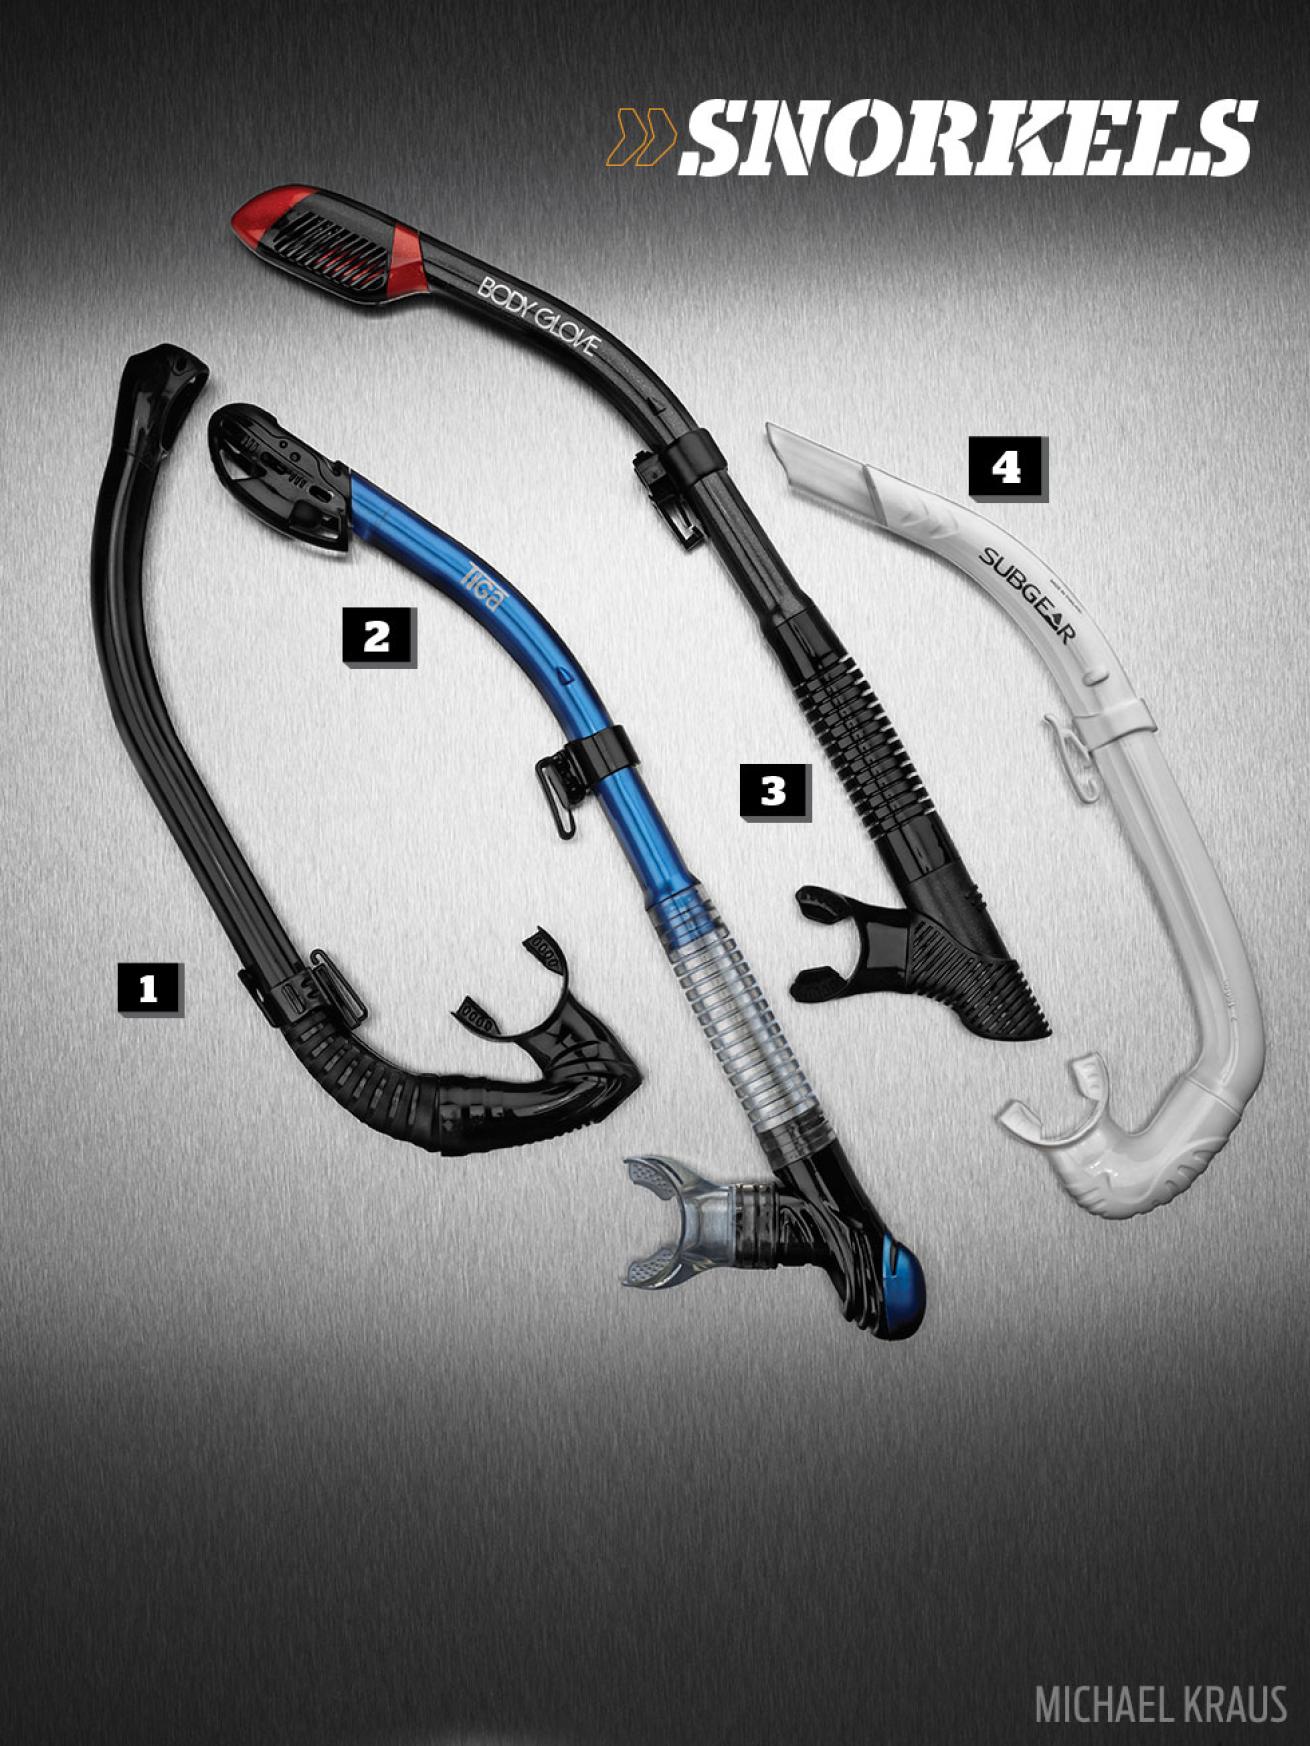 Snorkels ScubaLab 2015 Gear of the Year